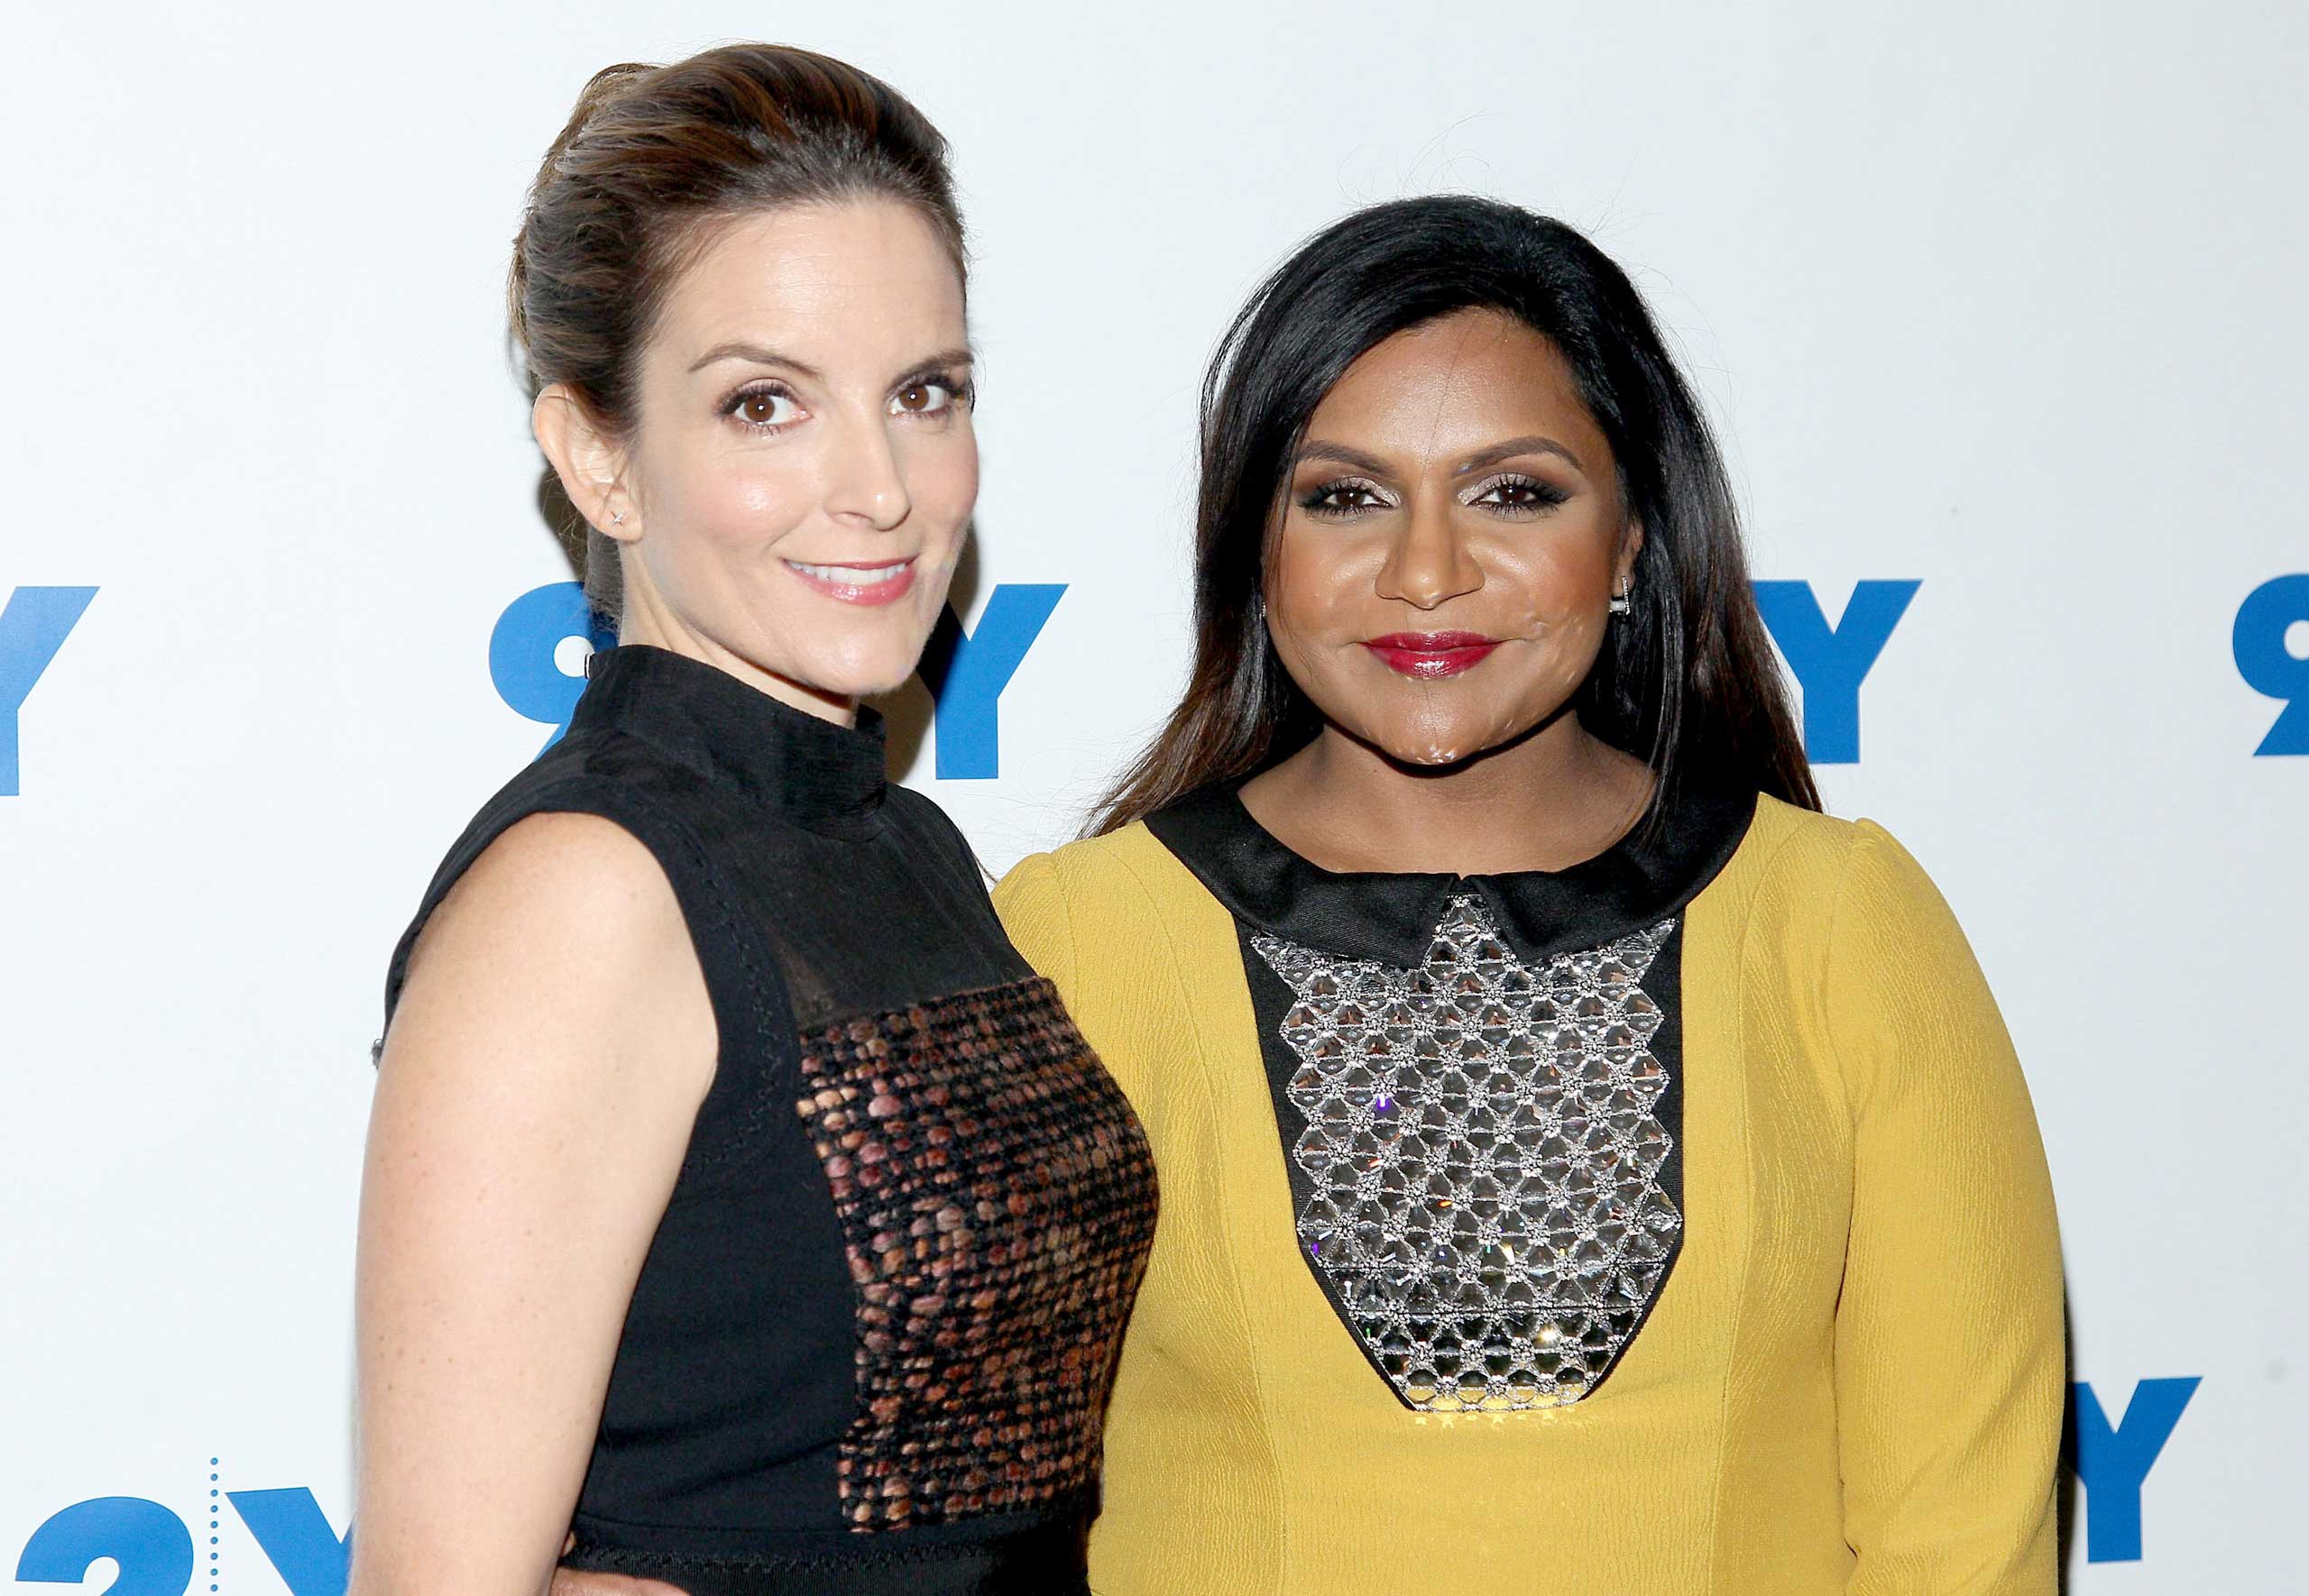 Tina Fey and Mindy Kaling attend 92nd Street Y Presents: Mindy Kaling In Conversation With Tina Fey at 92nd Street Y in New York City, on Sept. 16, 2015. (Steve Mack—WireImage/Getty Images)